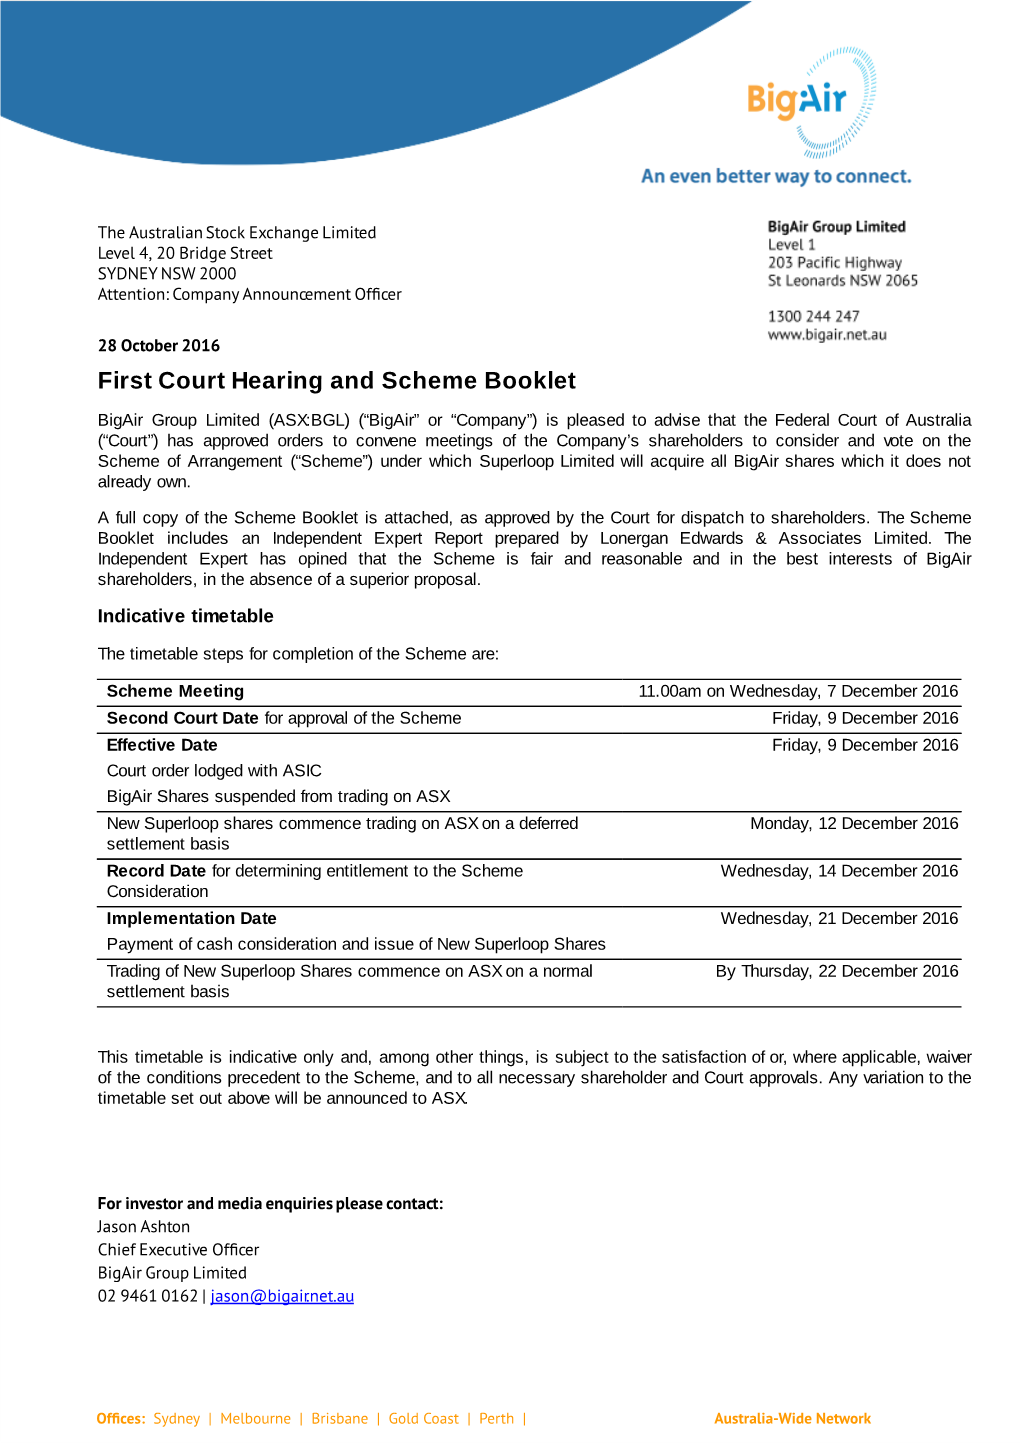 First Court Hearing and Scheme Booklet